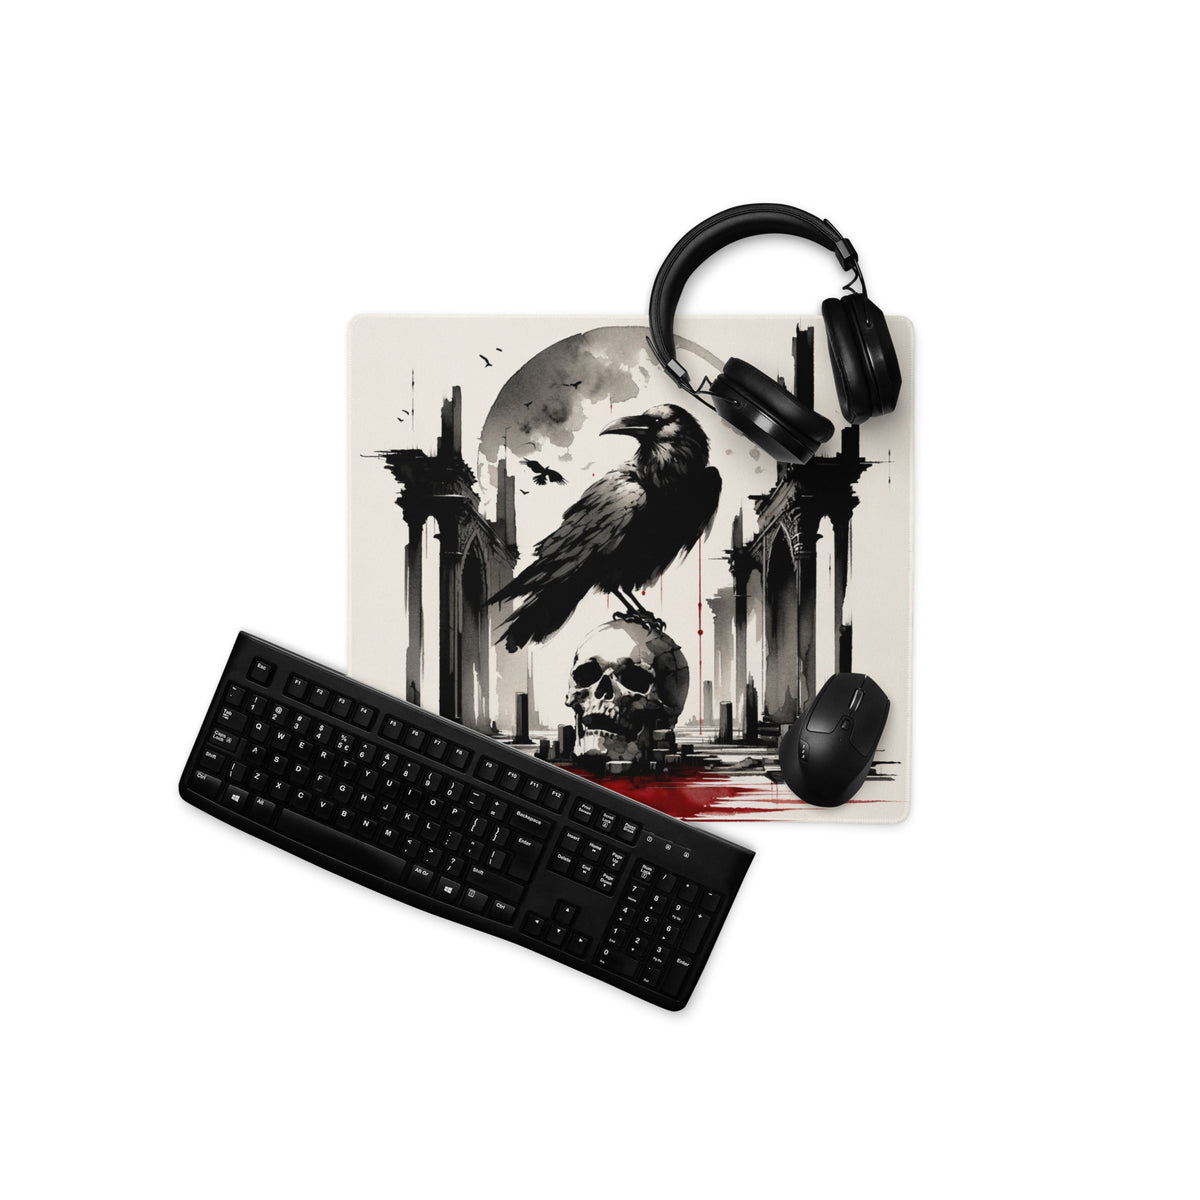 Raven & Skull Gaming Mouse Pad